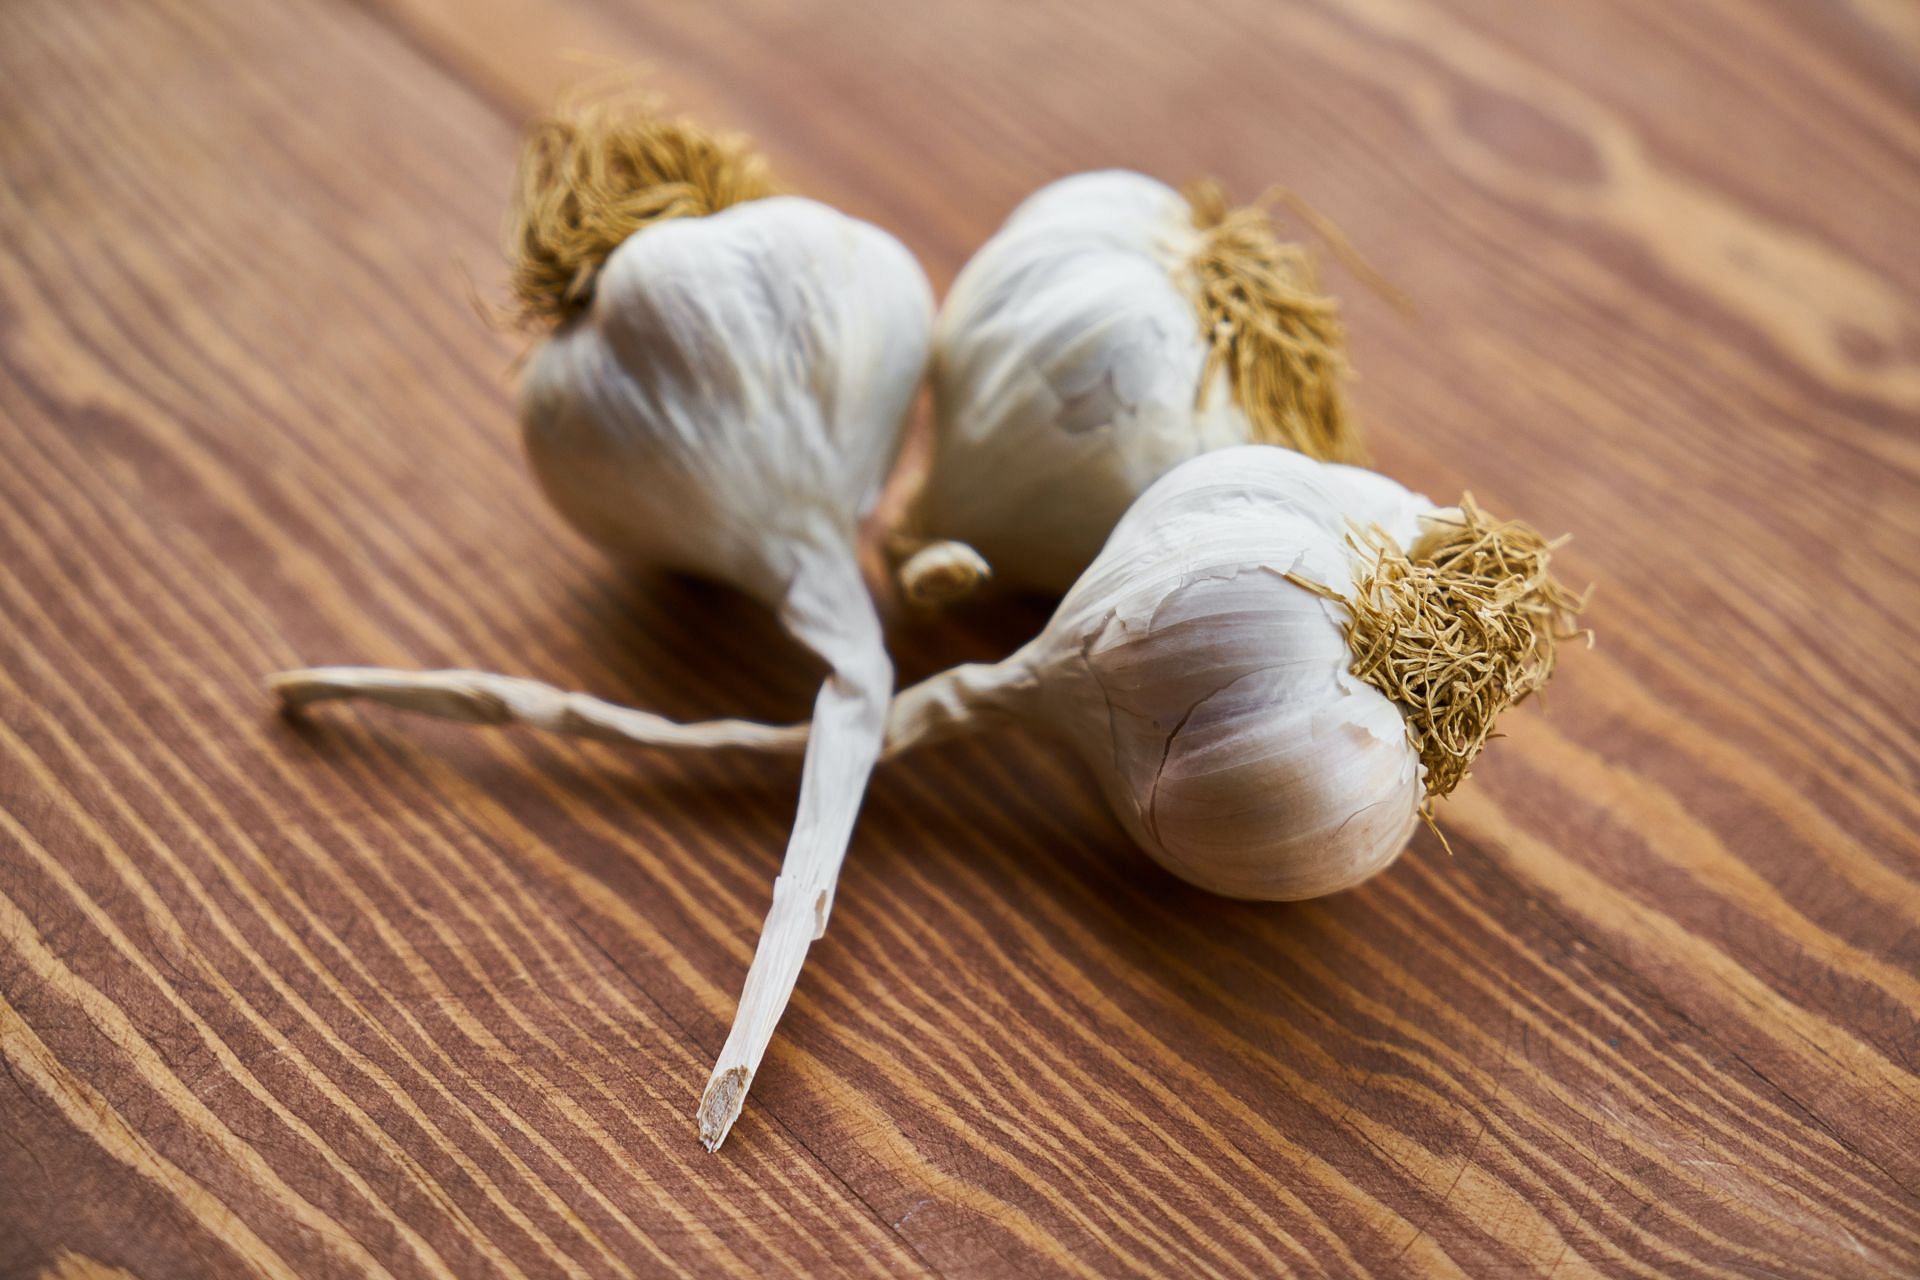 Importance of garlic for blood pressure  (image sourced via Pexels / Photo by Engin)